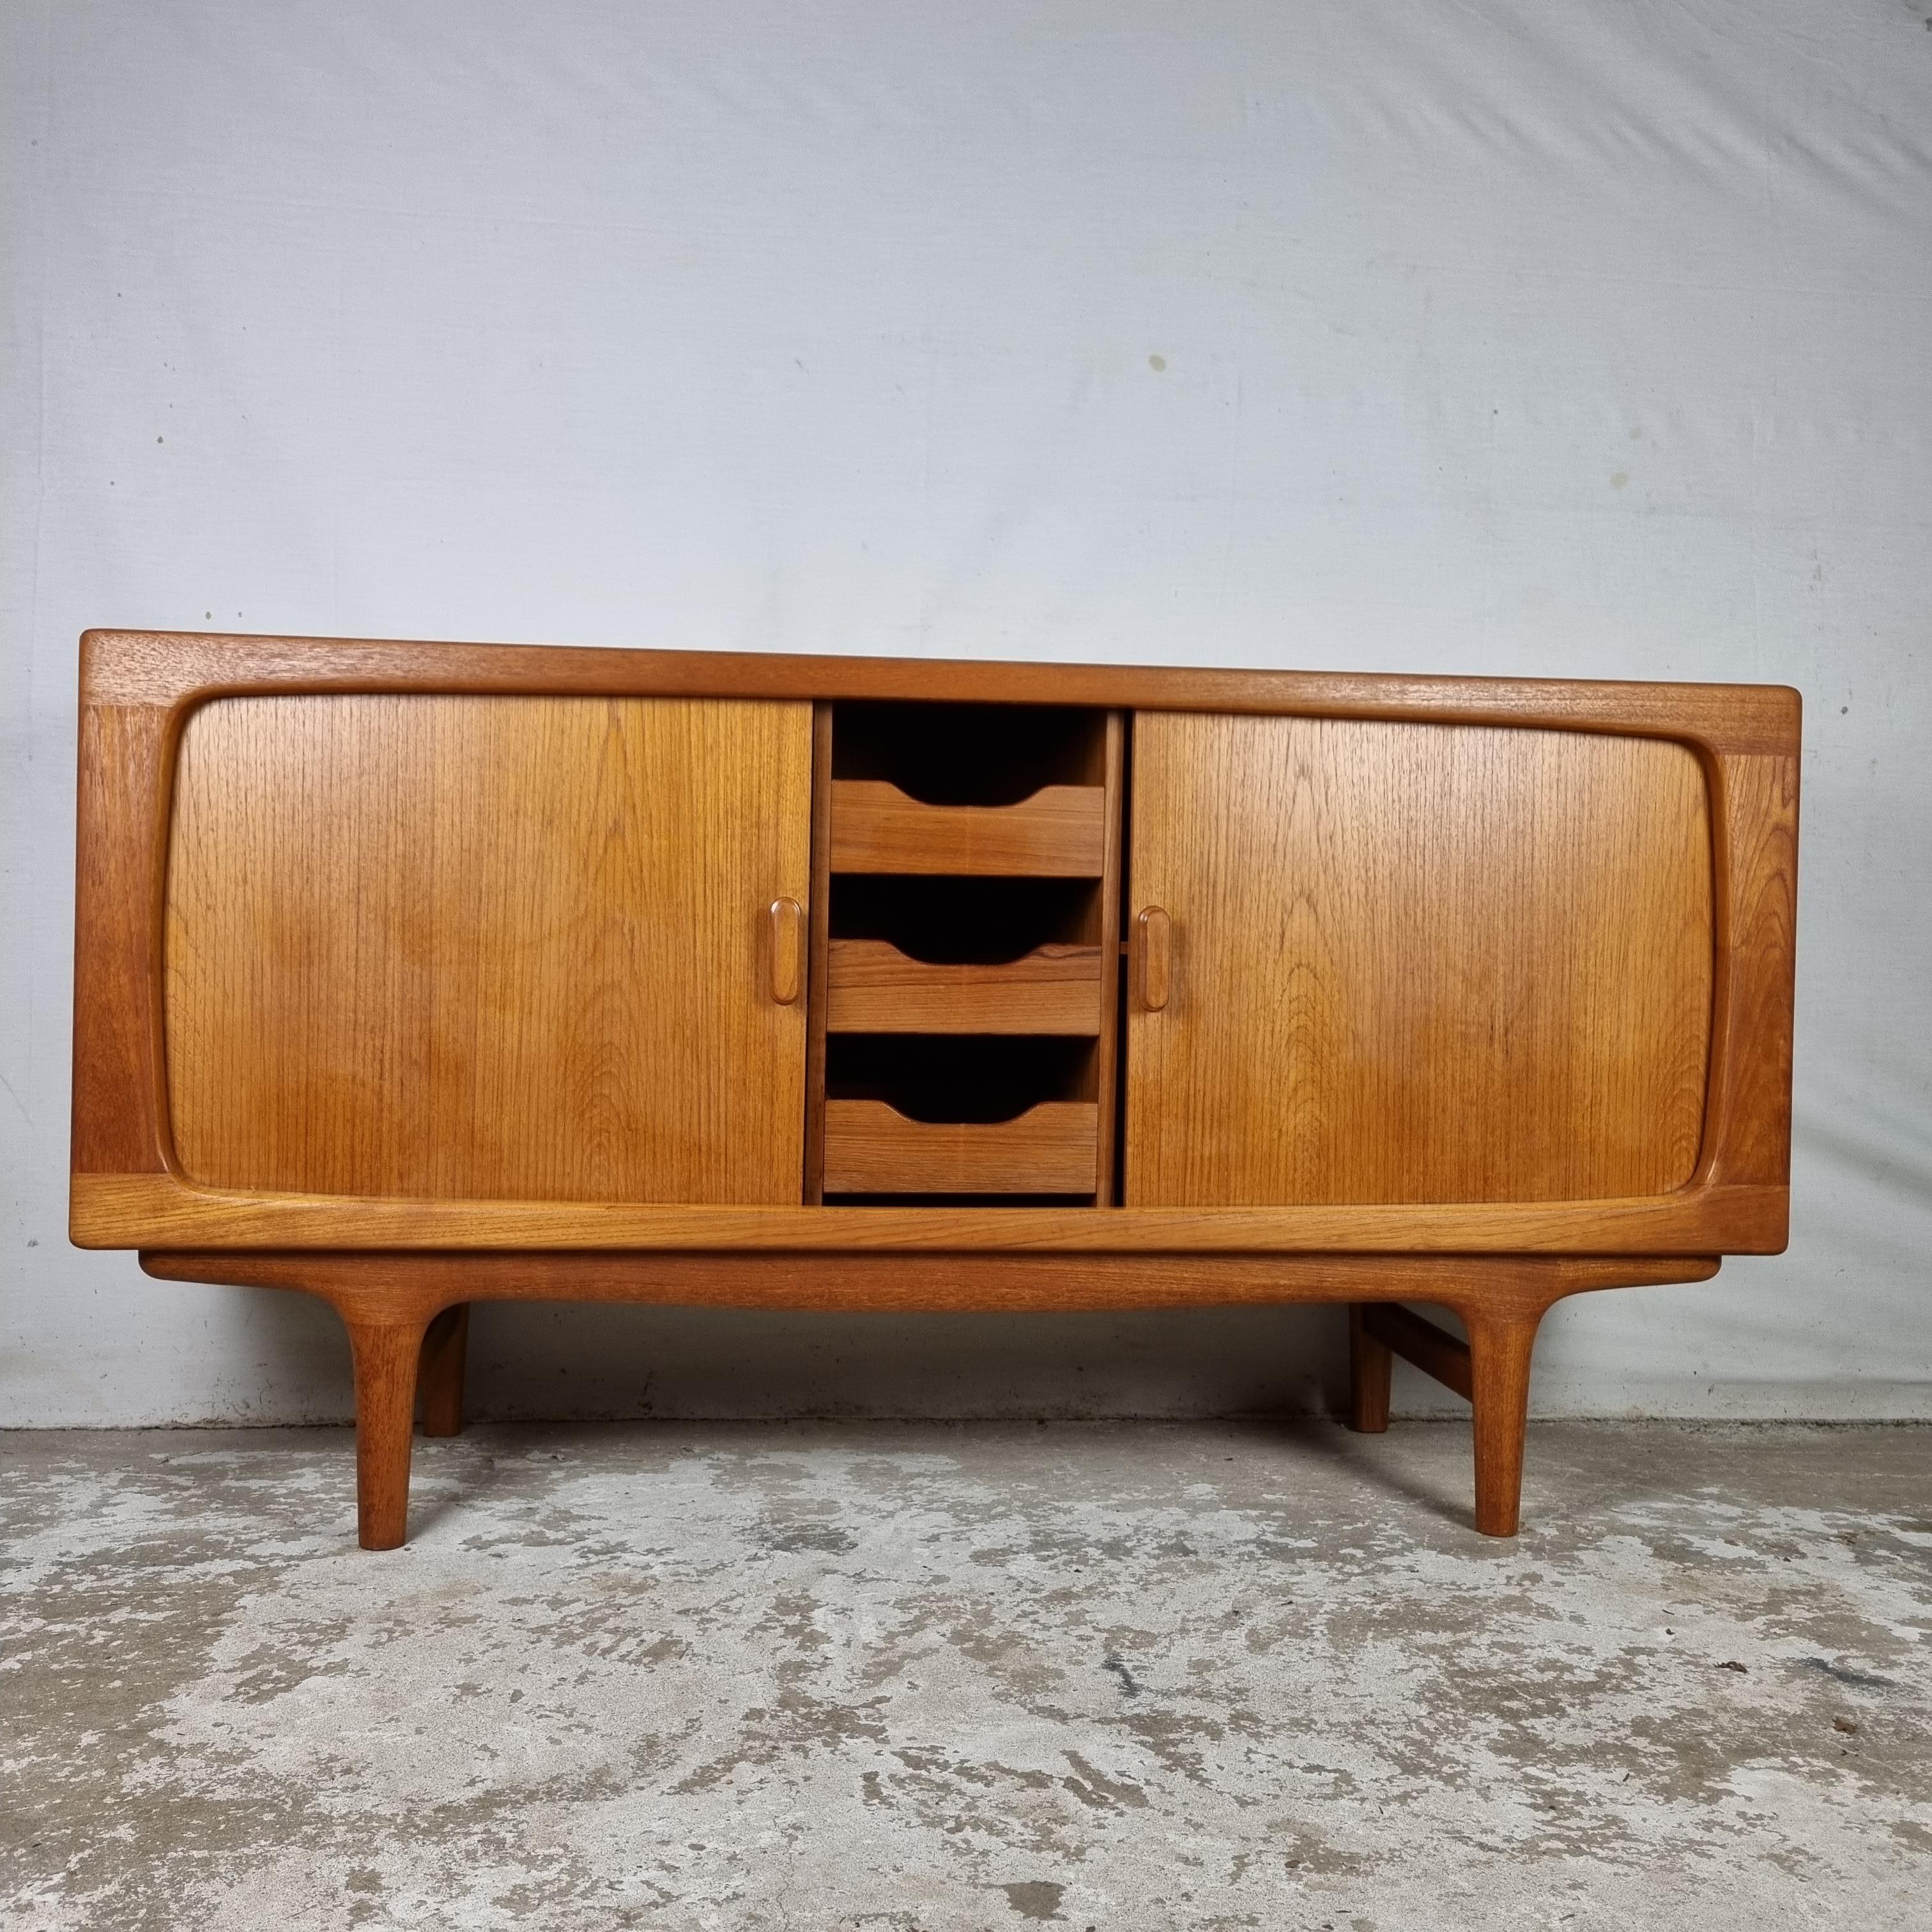 Beautiful Mid Century Danish sideboard / dresser from the 1960s. Designed by Johannes Andersen for the high-end quality brand CFC Silkeborg from Denmark 🇩🇰. 

Still in very good condition! Made from the most beautiful teak wood, equipped with